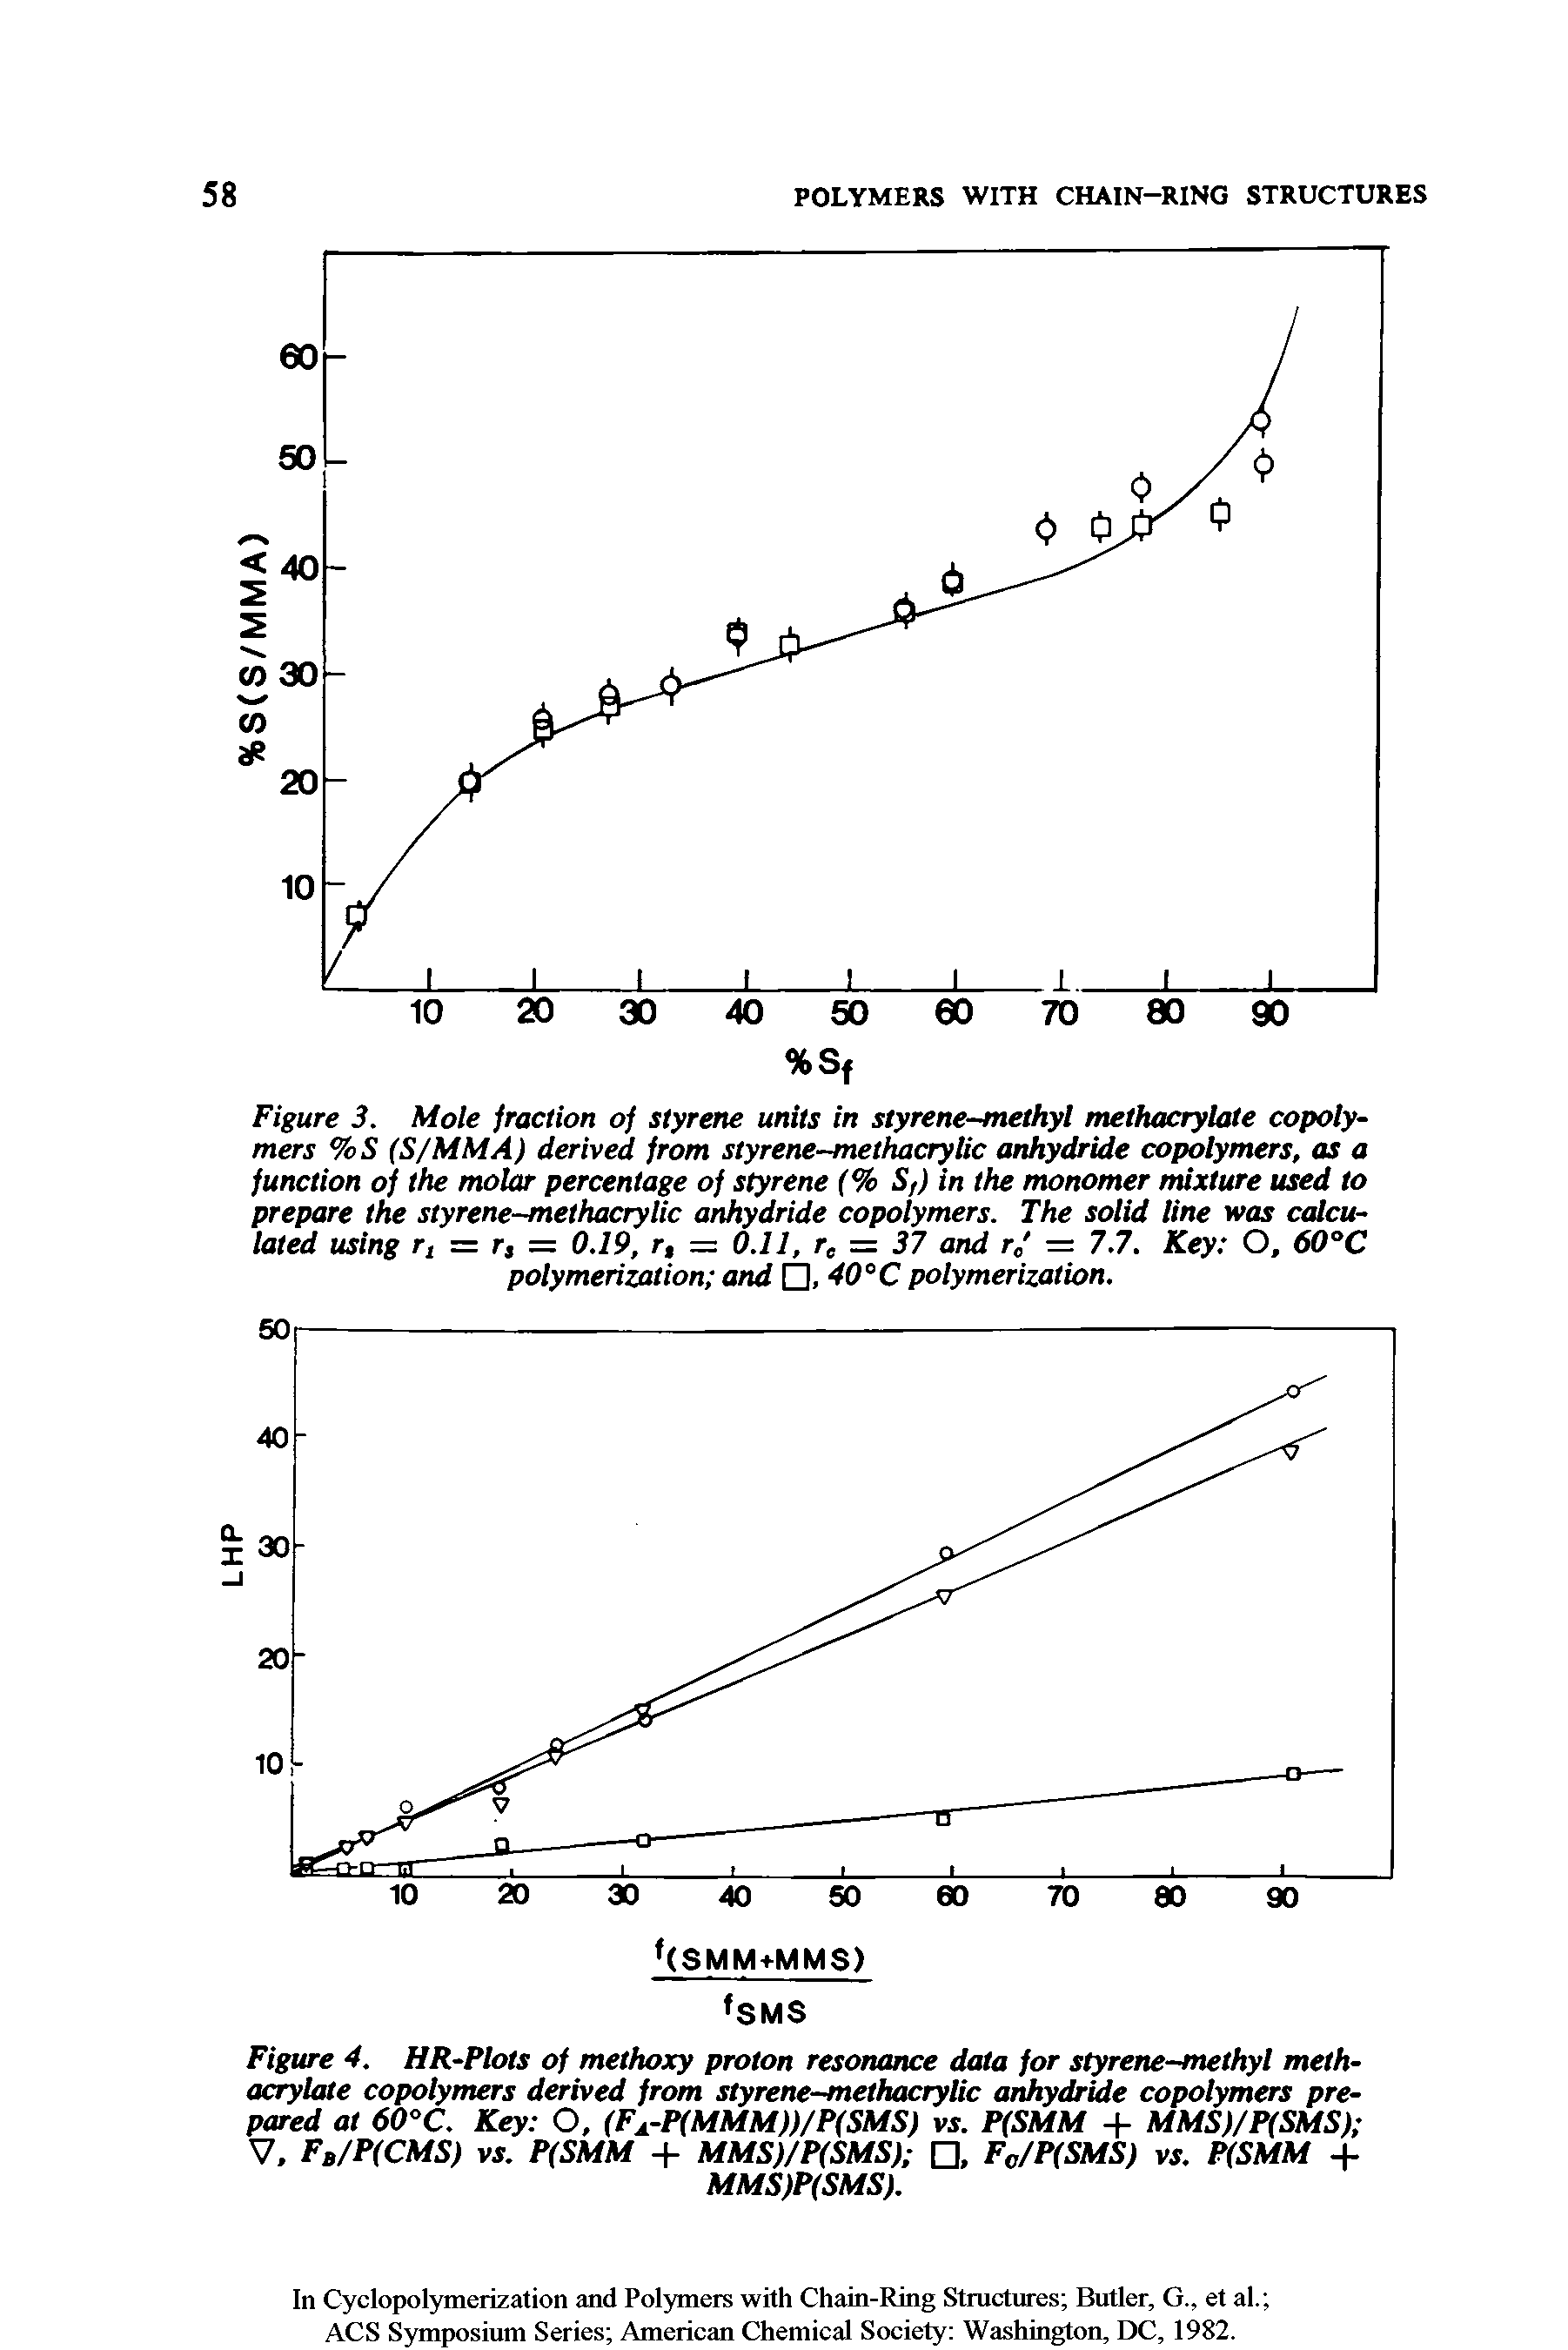 Figure 3. Mole fraction of styrene units in styrene-methyl methacrylate copolymers %S (S/MMA) derived from styrene-methacrylic anhydride copolymers, as a function of the molar percentage of styrene (% S,) in the monomer mixture used to prepare the styrene-methacrylic anhydride copolymers. The solid line was calculated using rt = r, = 0.19, r, = 0.11, rc = 37 and rc = 7.7. Key O, 60°C polymerization and , 40°C polymerization.